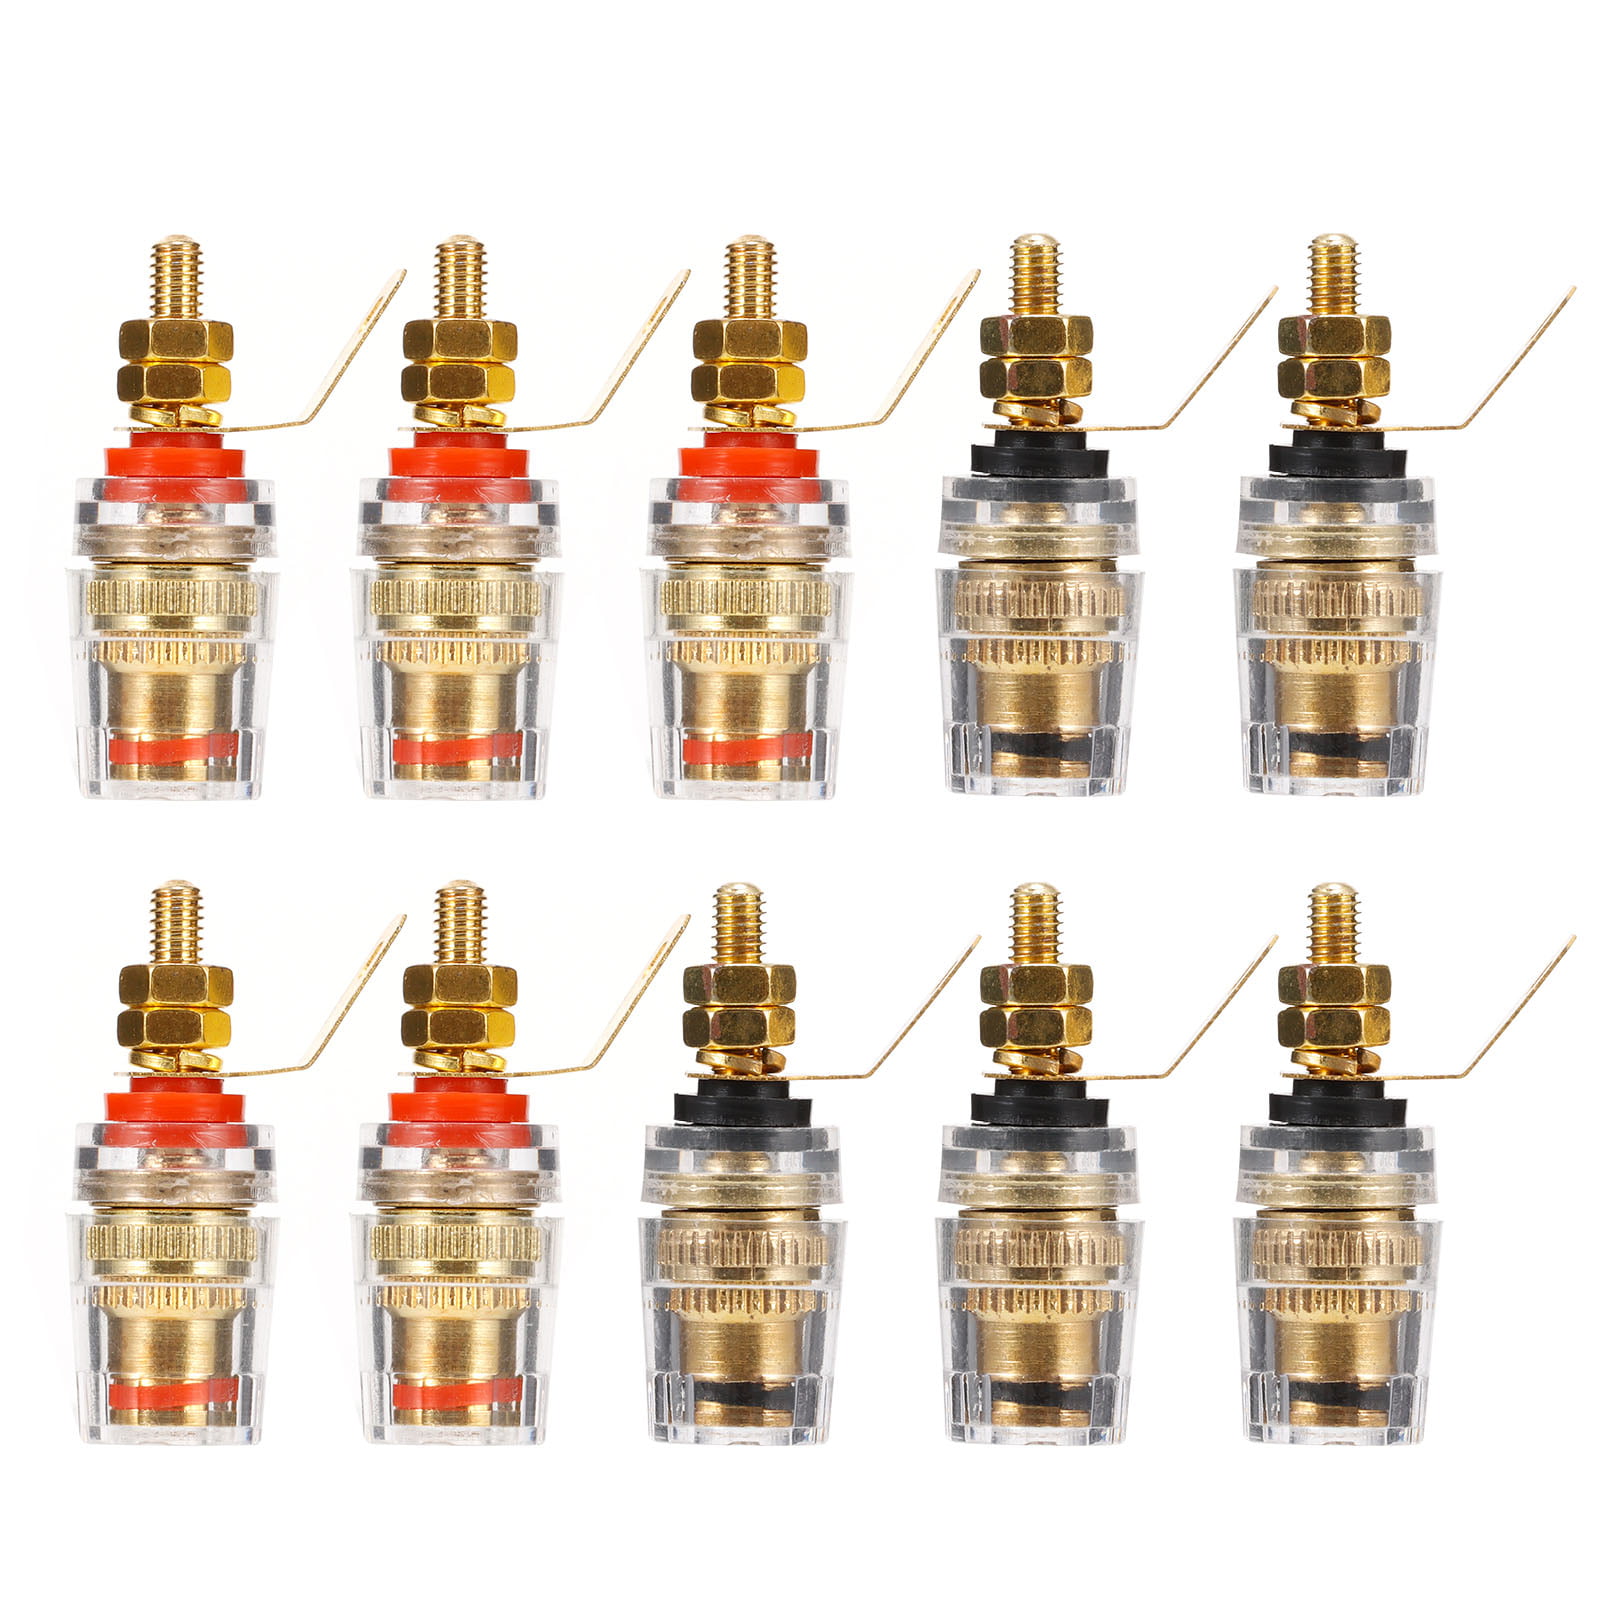 10pcs Gold Plated Audio Speaker Binding Post Amplifier Terminal For 4mm Plug Hot 